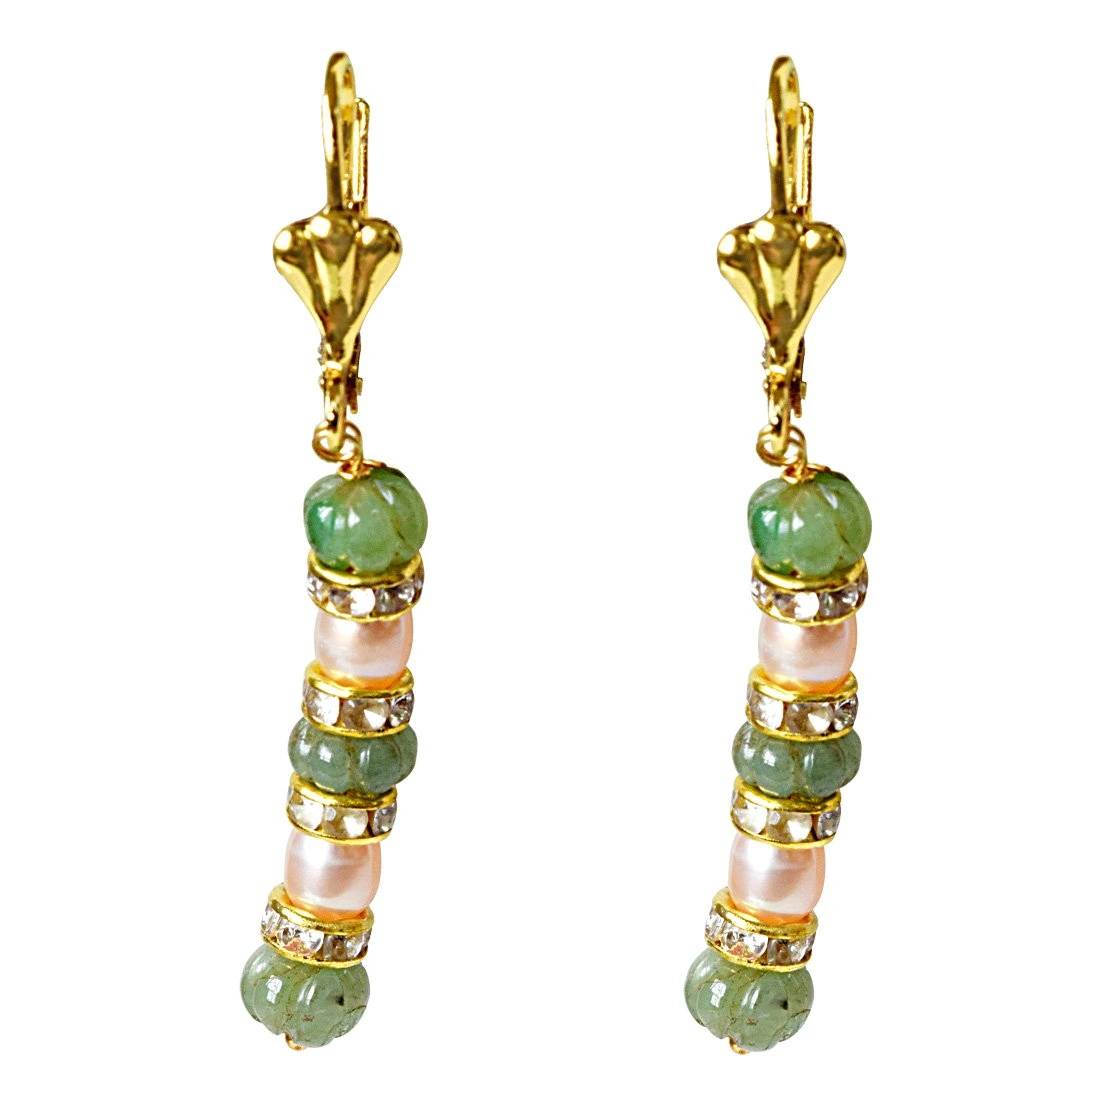 Real Green Engraved Emerald Beads and Peach Freshwater Pearl Hanging Earrings for Women (SE332)